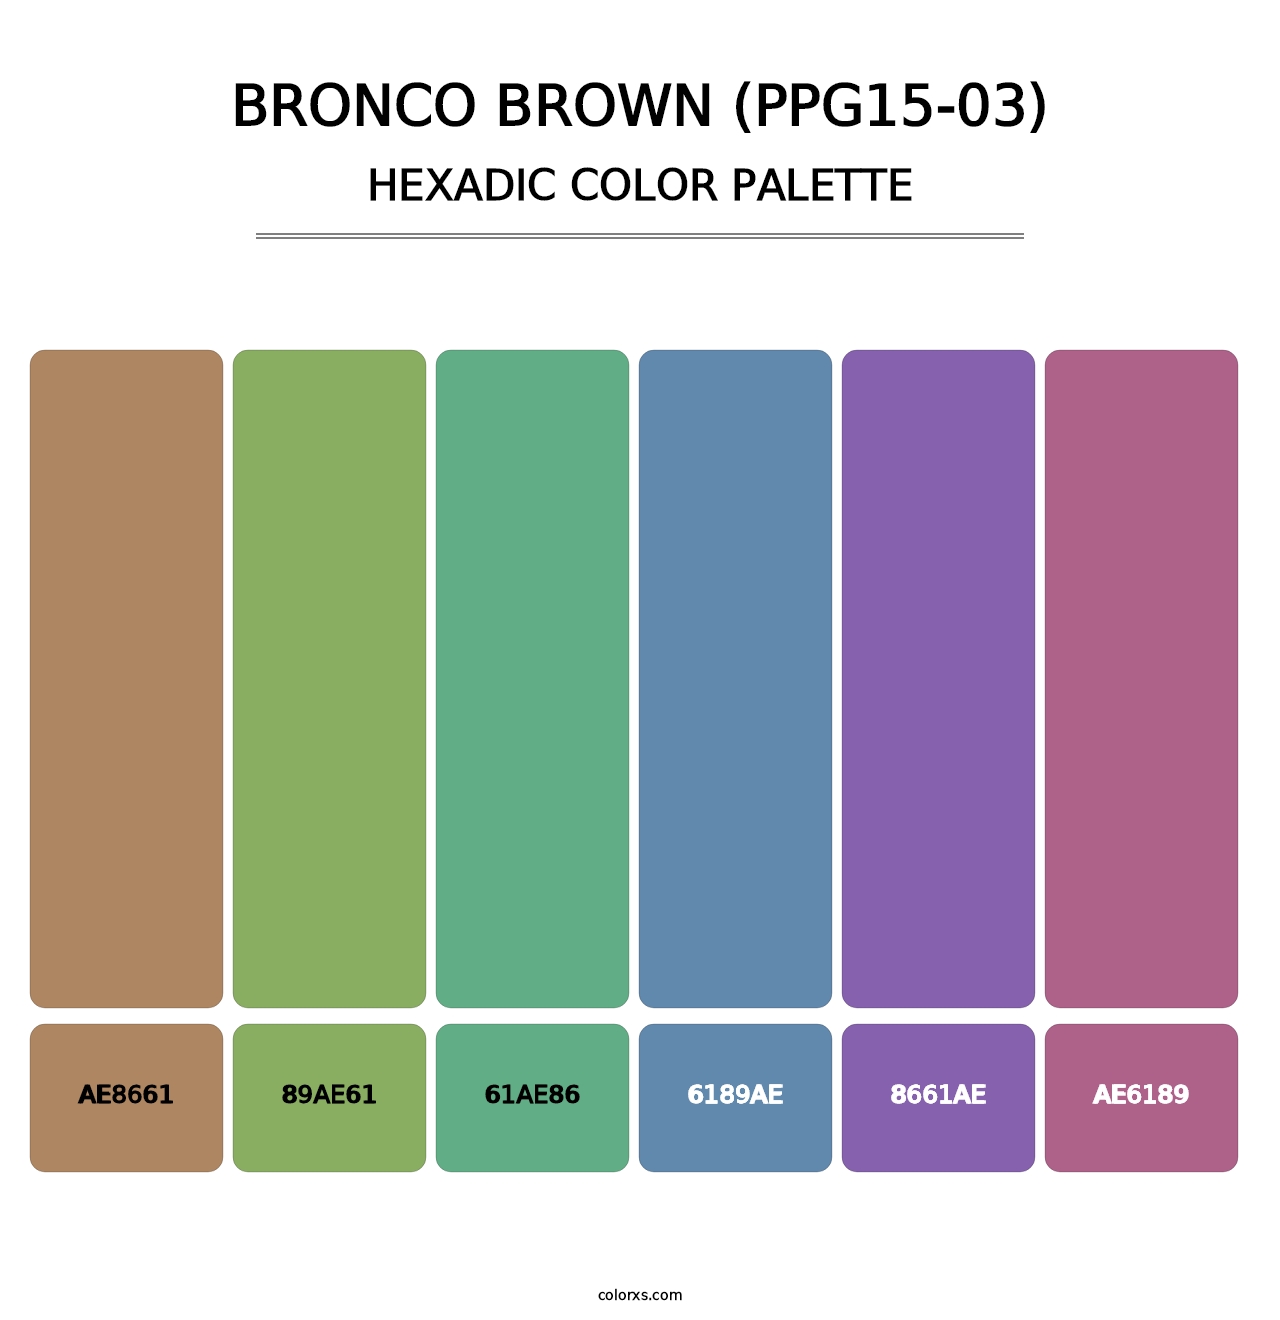 Bronco Brown (PPG15-03) - Hexadic Color Palette